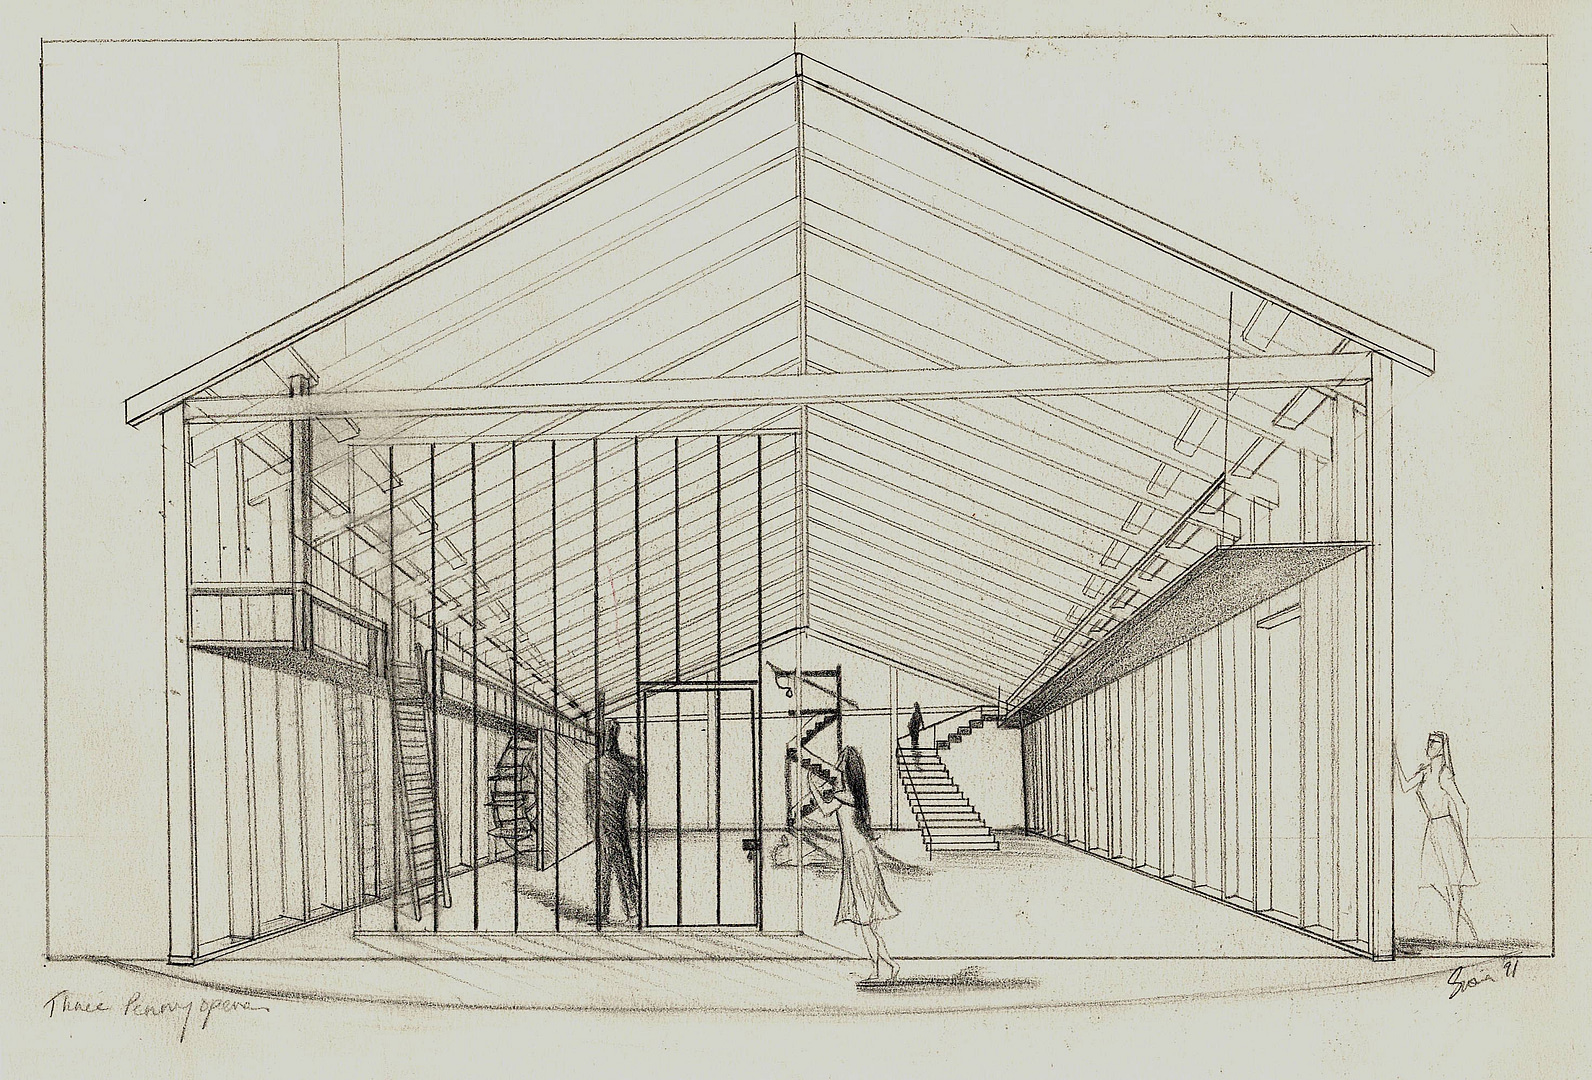 The Three Penny Opera by BertoltBrecht - Model and Set design sketch